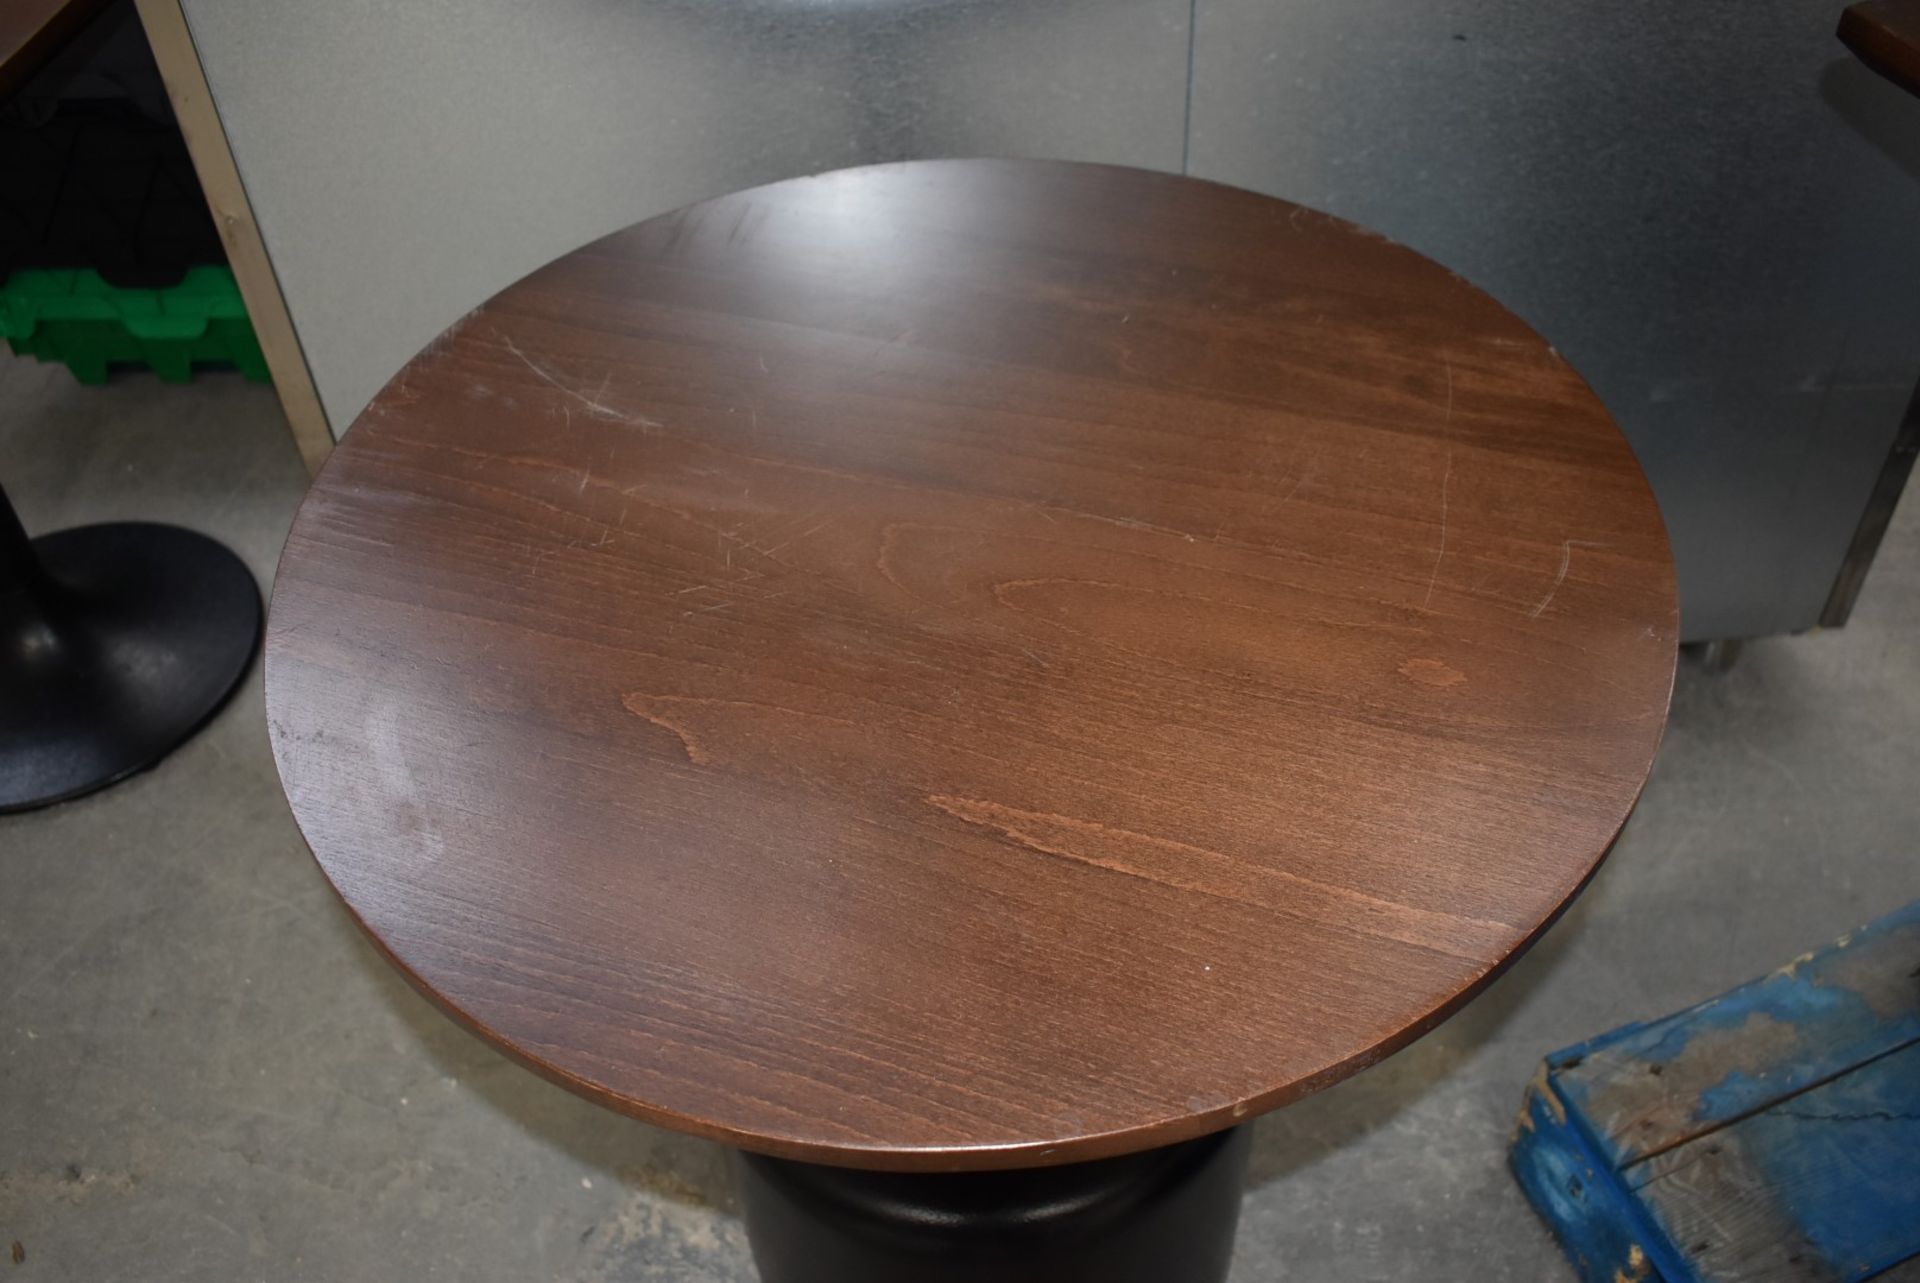 14 x Commercial Restaurant Tables Features Large Black Pedestals and Dark Stained Wooden Tops - Image 14 of 23